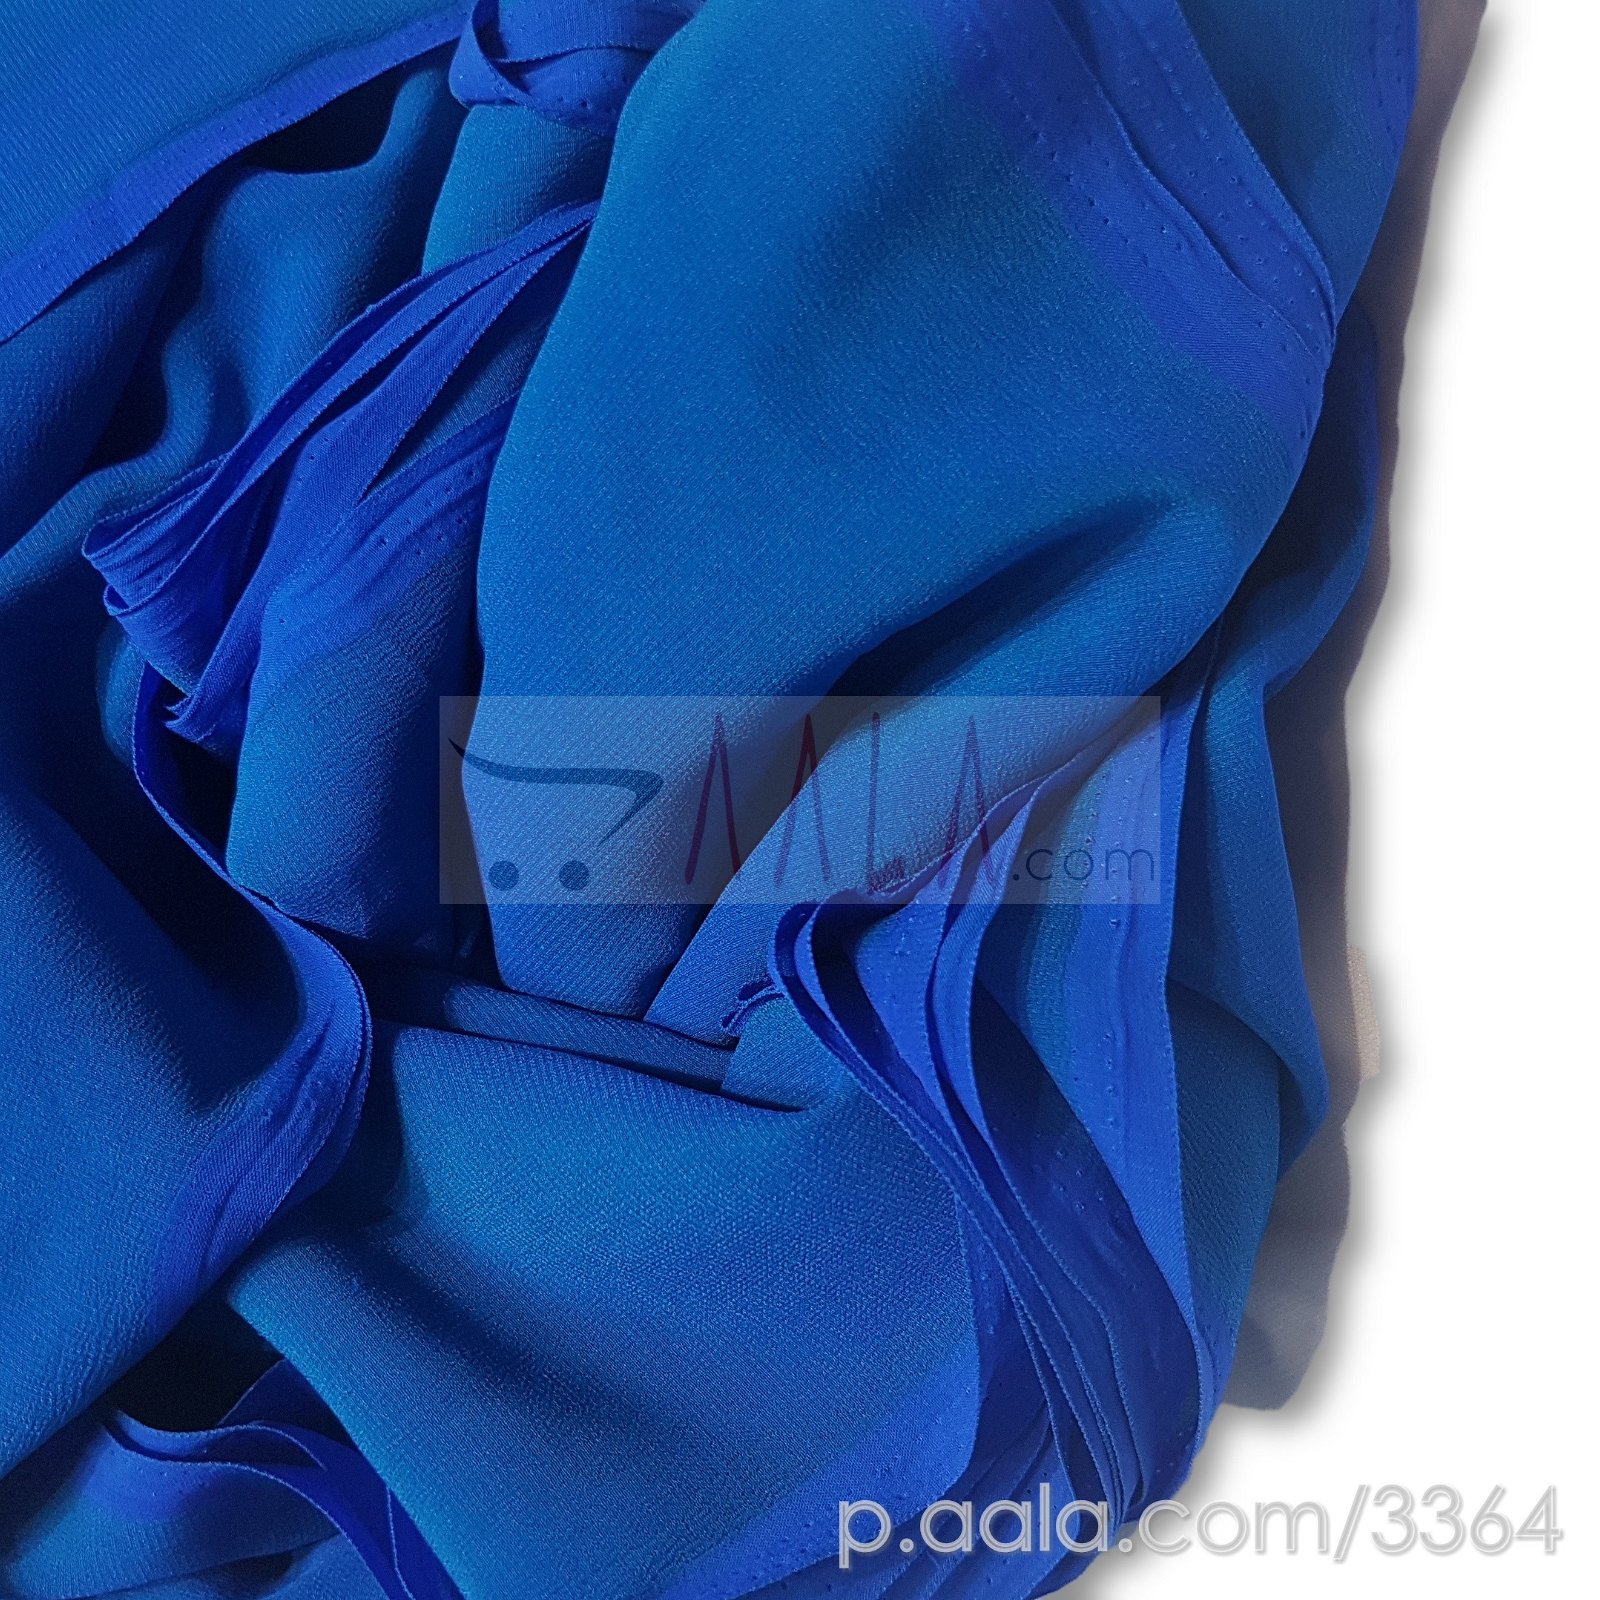 PT Tone Georgette Poly-ester 44 Inches Dyed Per Metre #3364